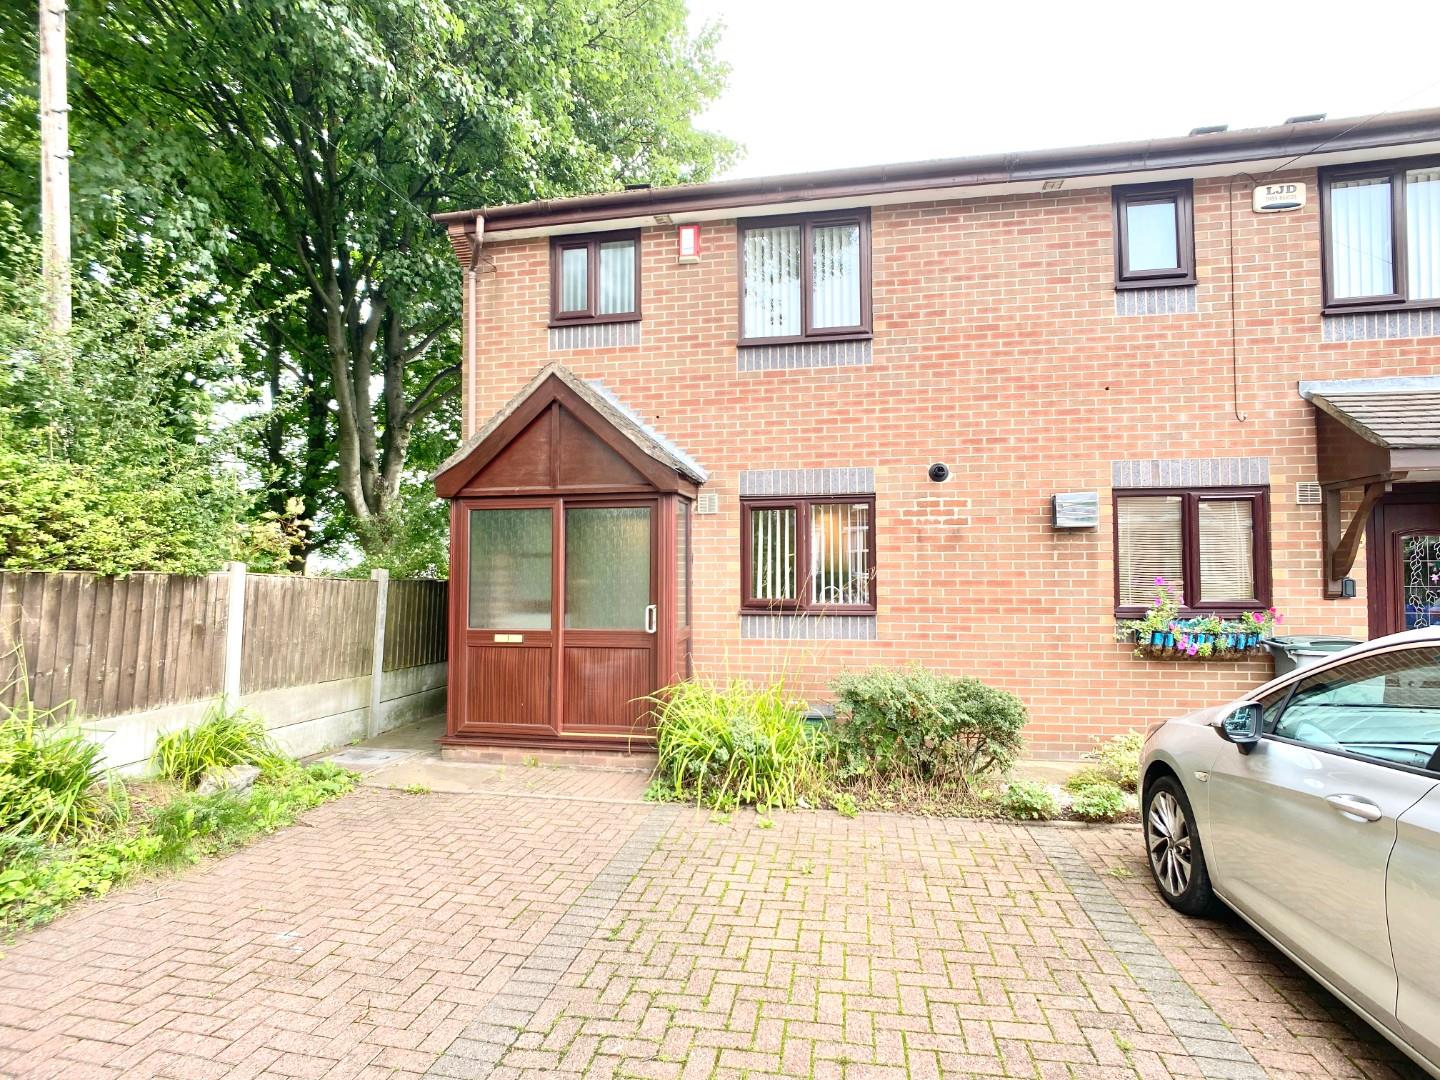 3 bed end of terrace house to rent in Victoria Street, Staffordshire - Property Image 1